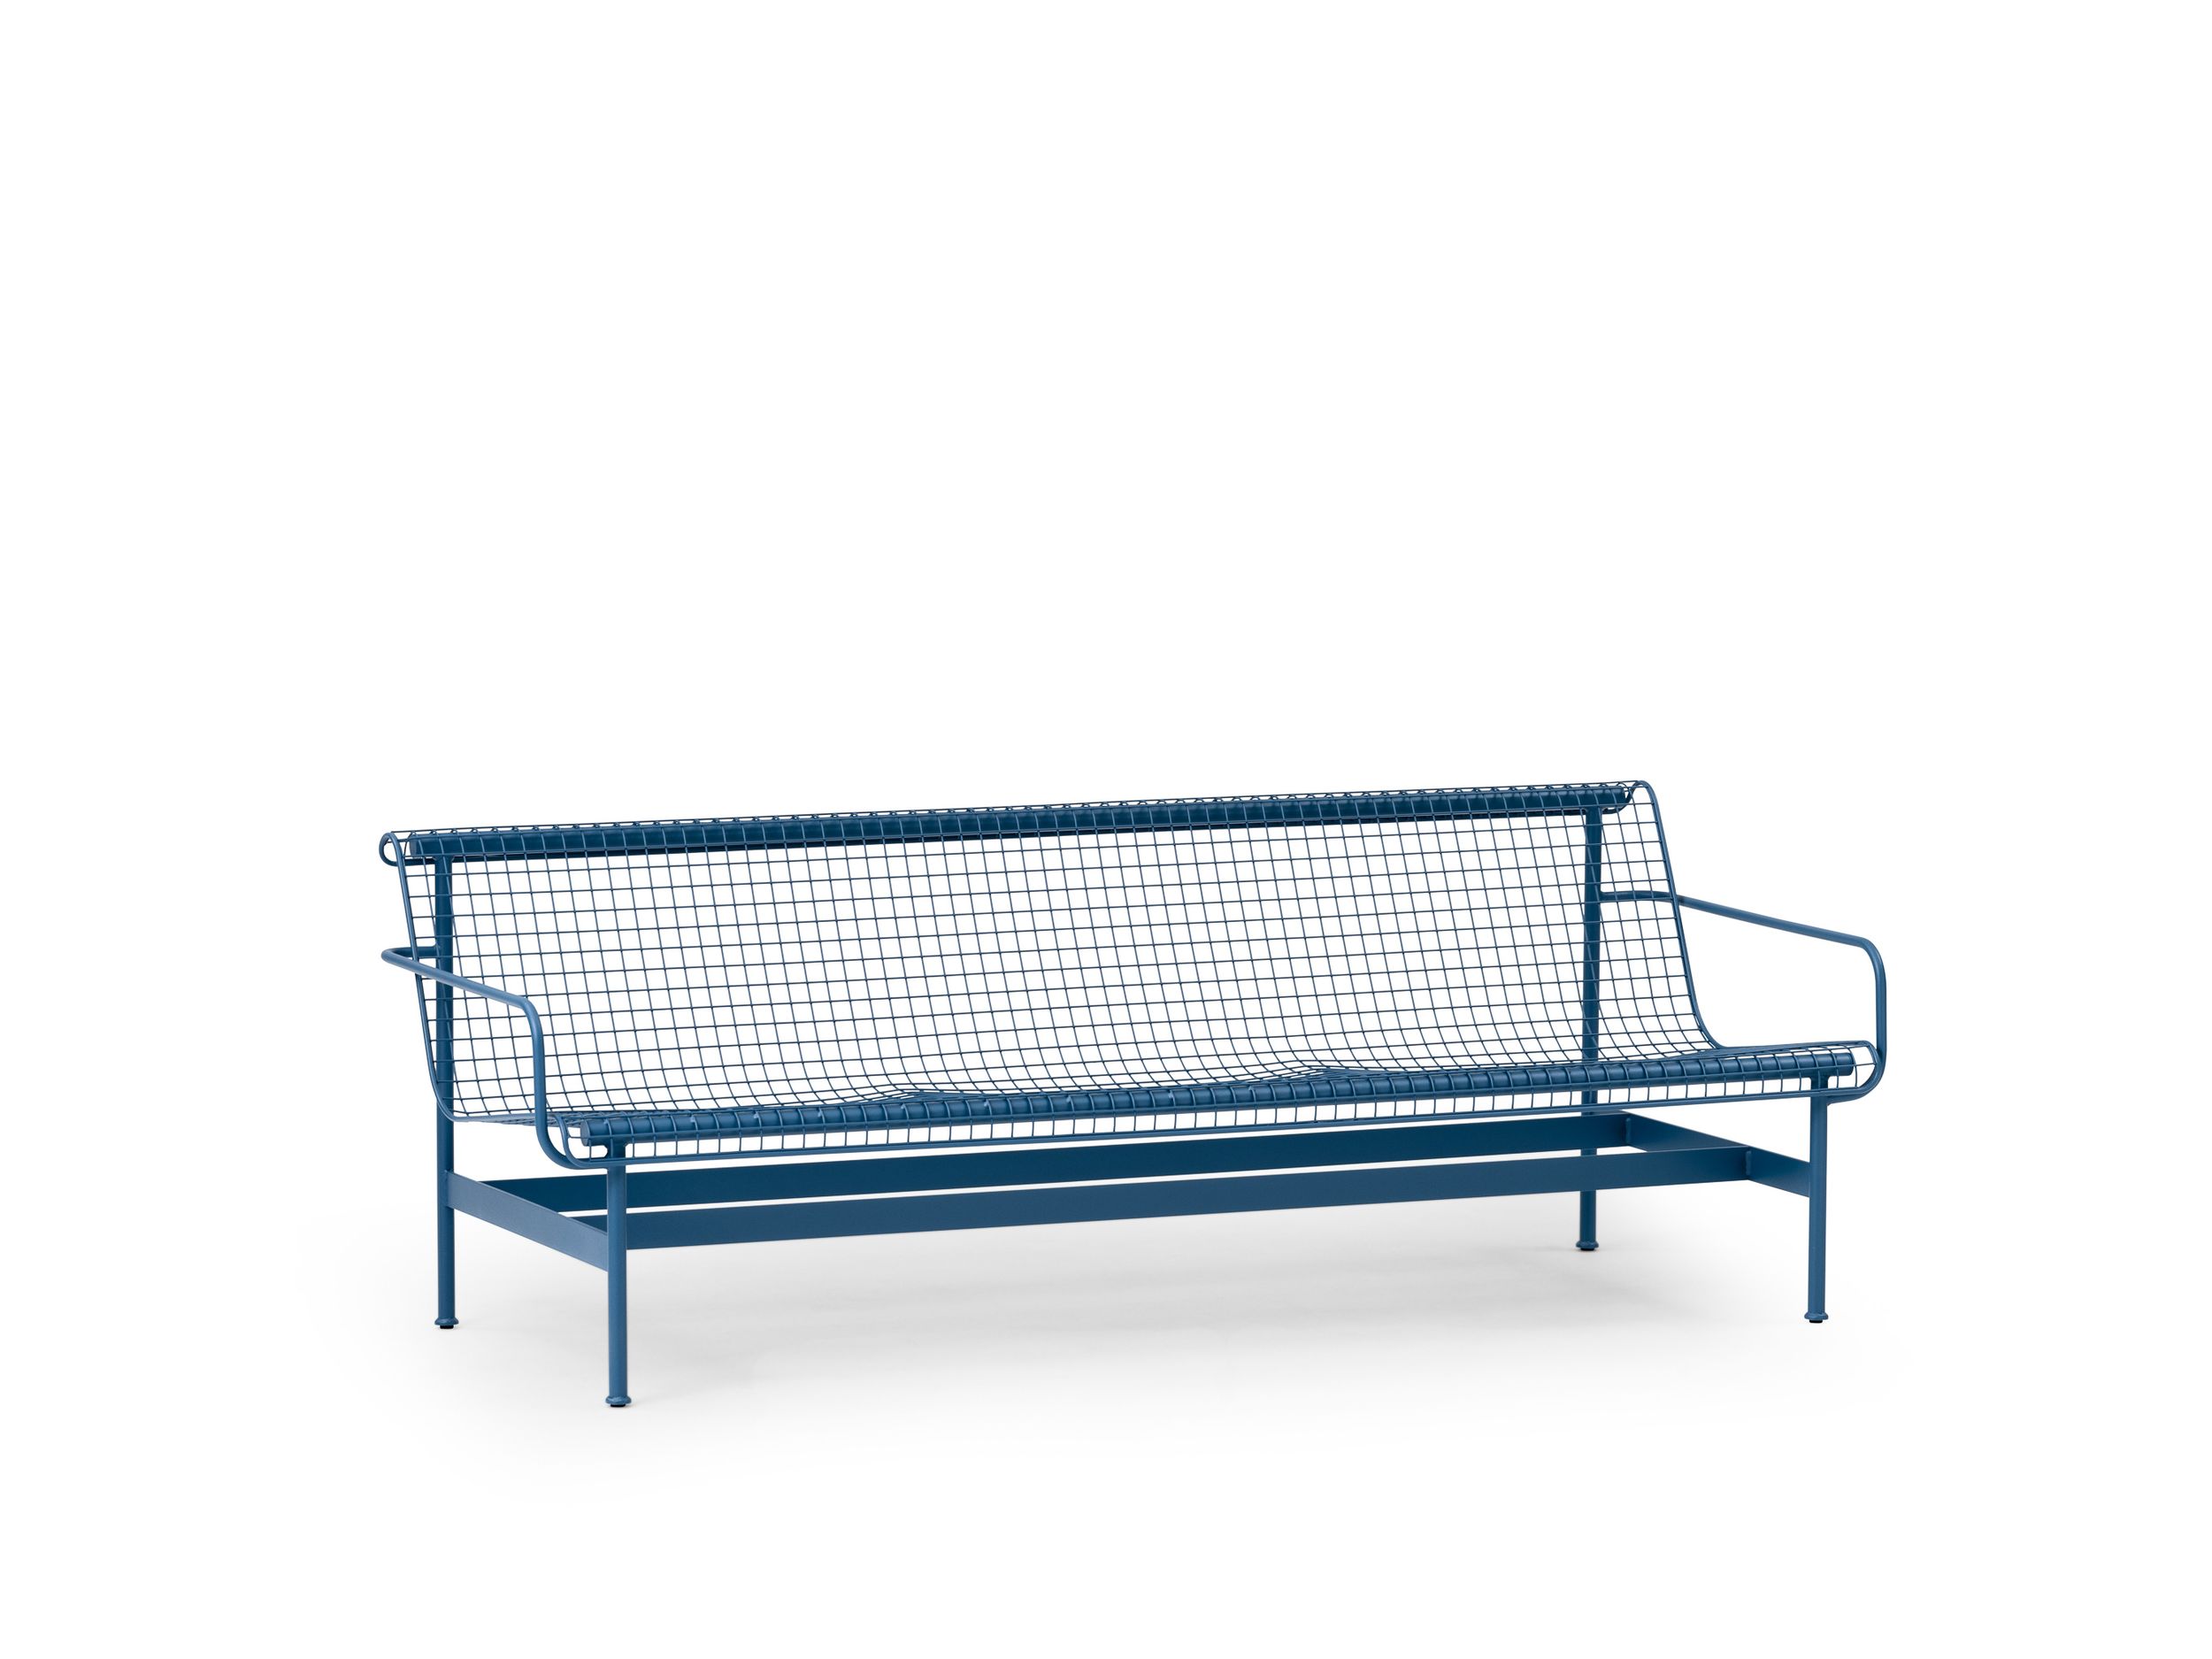 Munch Bench designed by Jonas Stokke and Andreas Engesvik for the Munch Museum in Oslo, blue bench